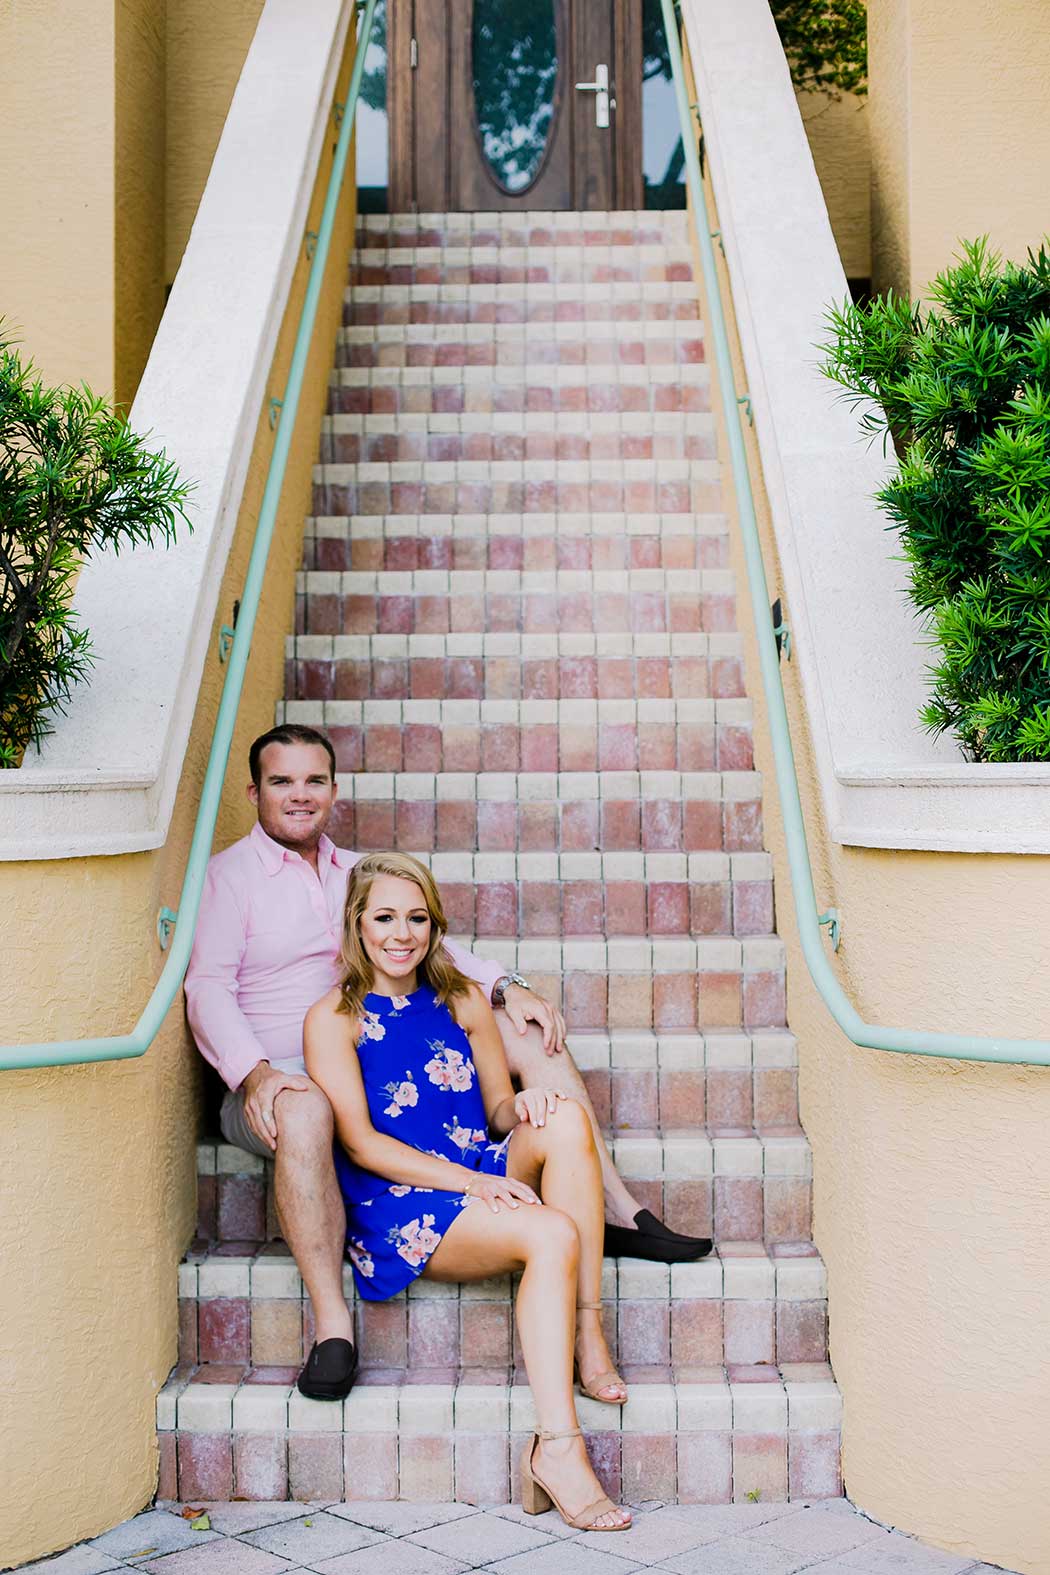 couple posing on stairway for engagement photoshoot | blue floral dress